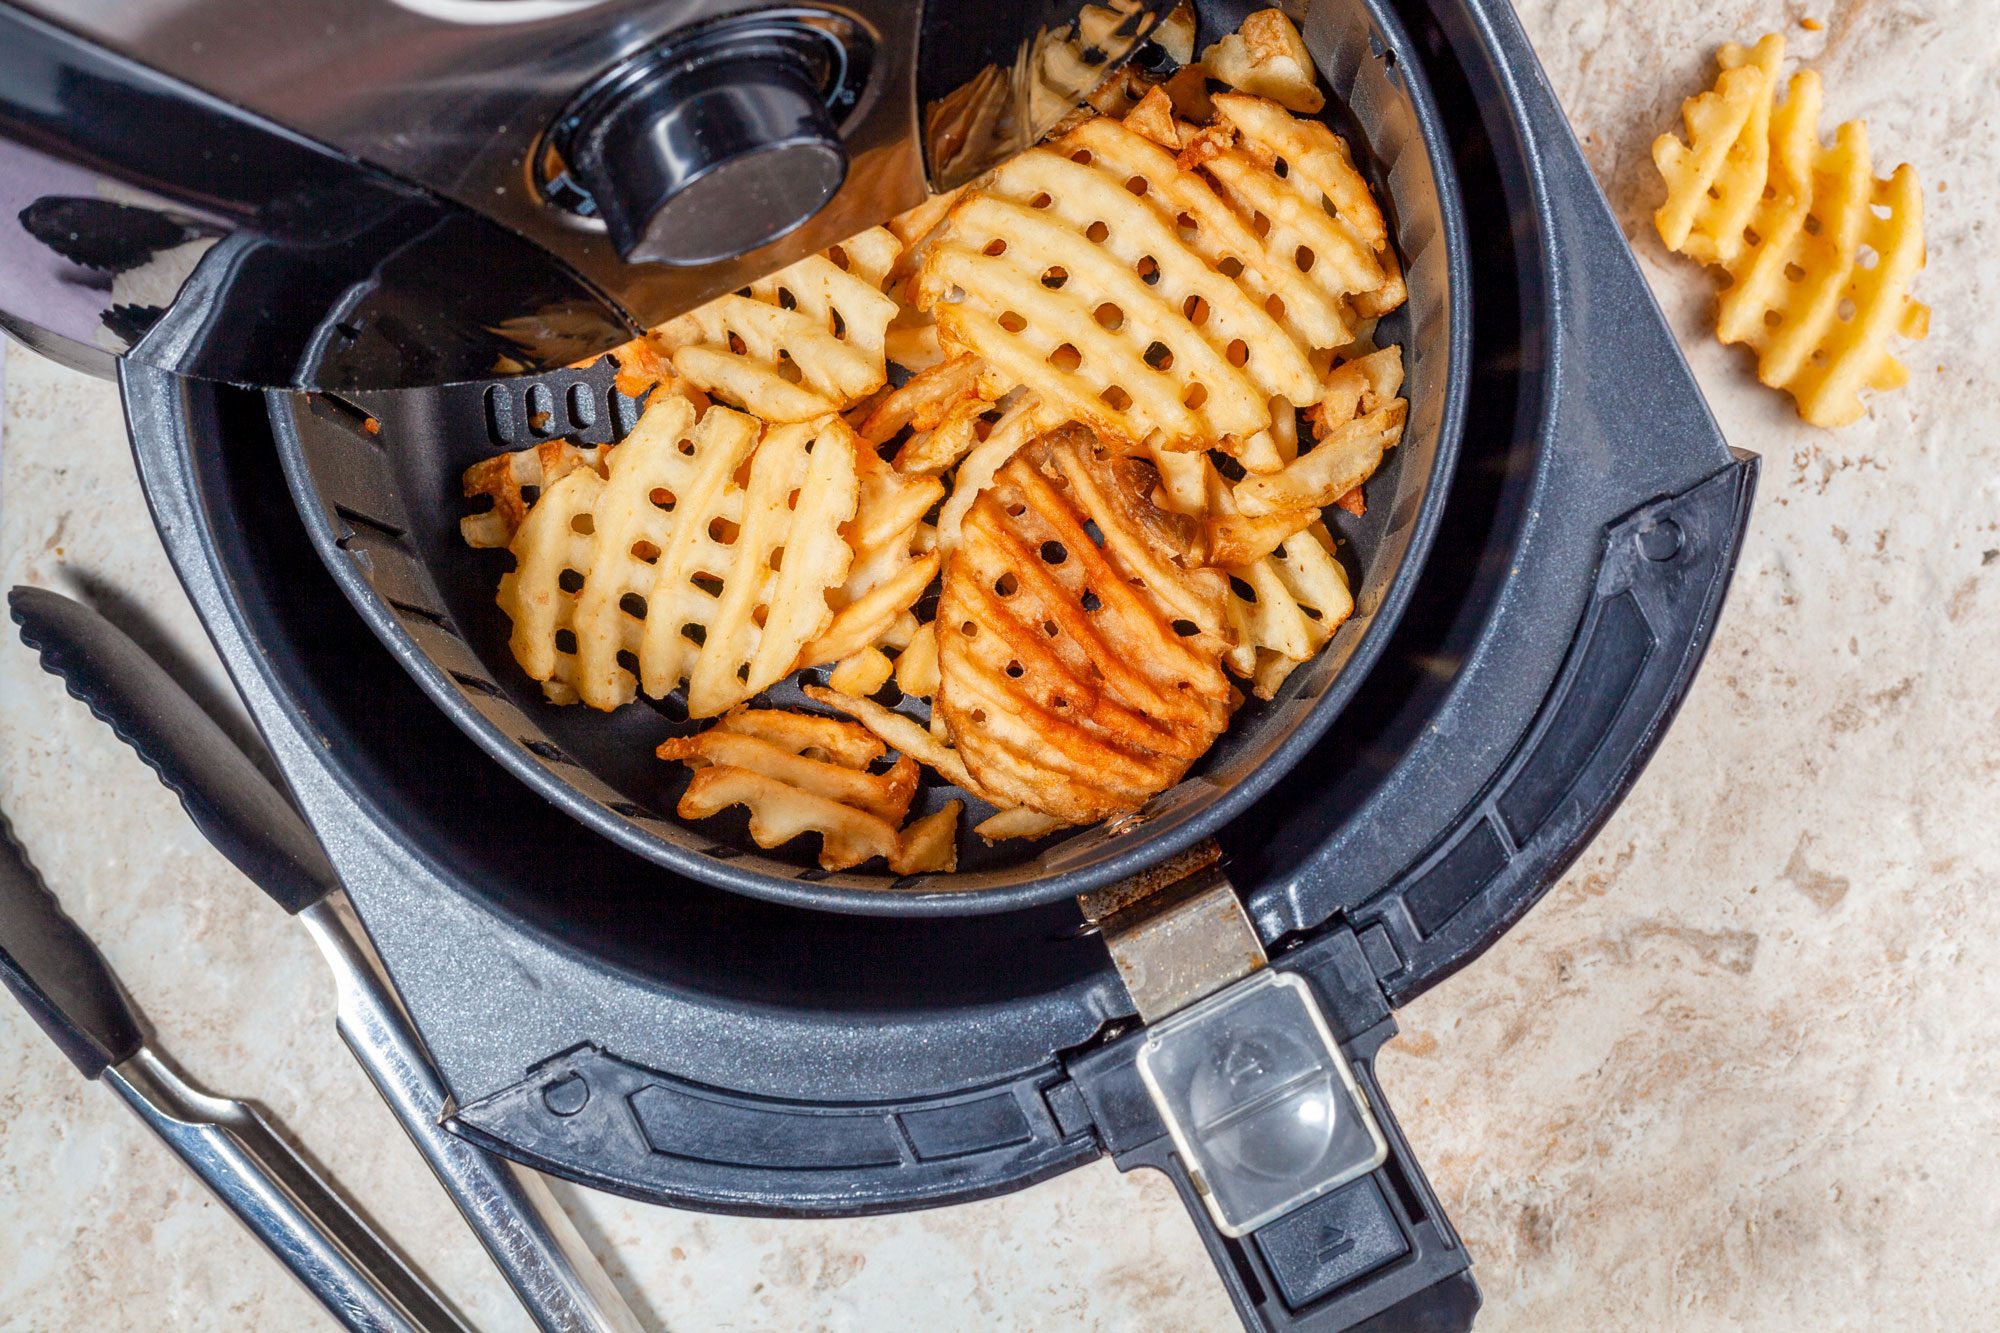 Reasons to love your new air fryer - Mayo Clinic Health System